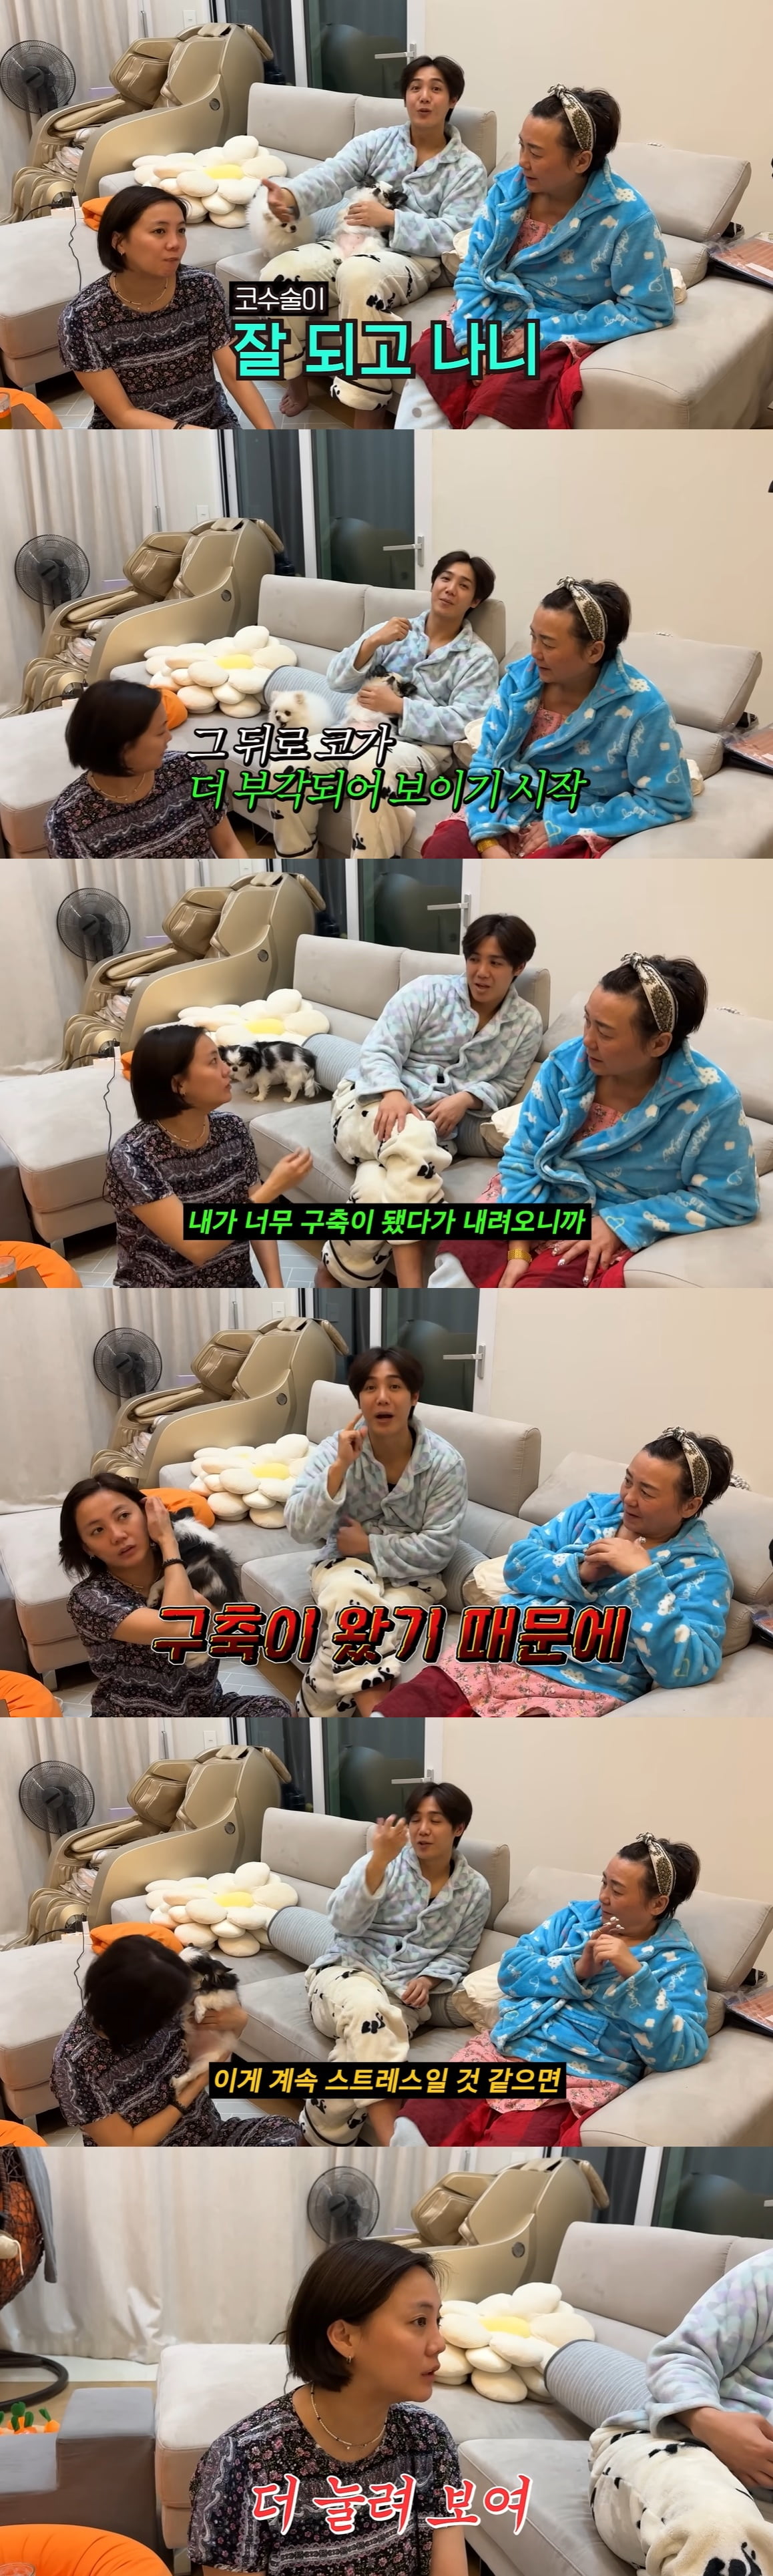 Go Eun-ah “I want to have nose surgery again, but I’m at a loss”